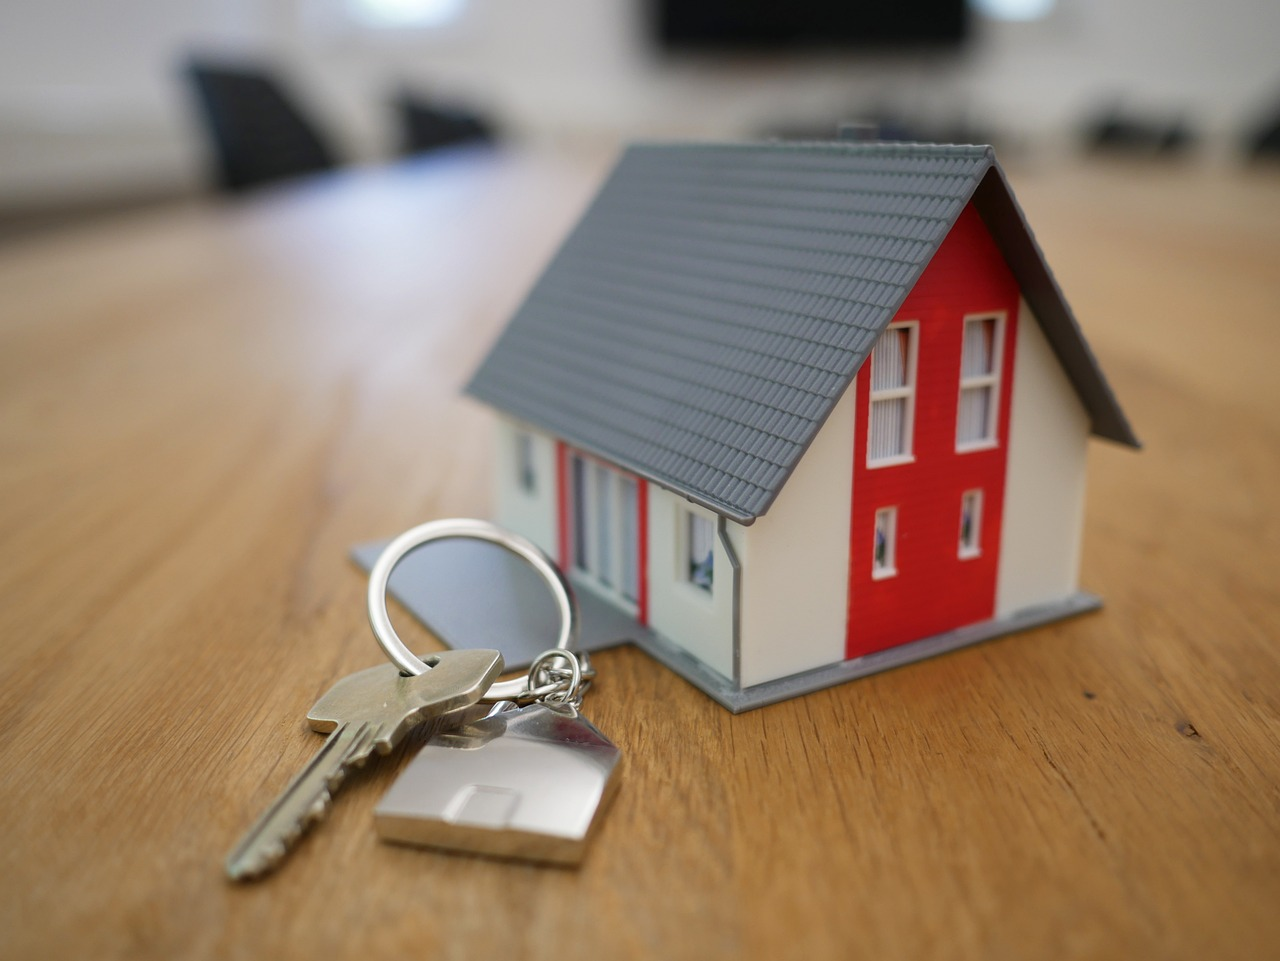 HSBC and intermediaries can work together to help clients achieve their dream of owning a home